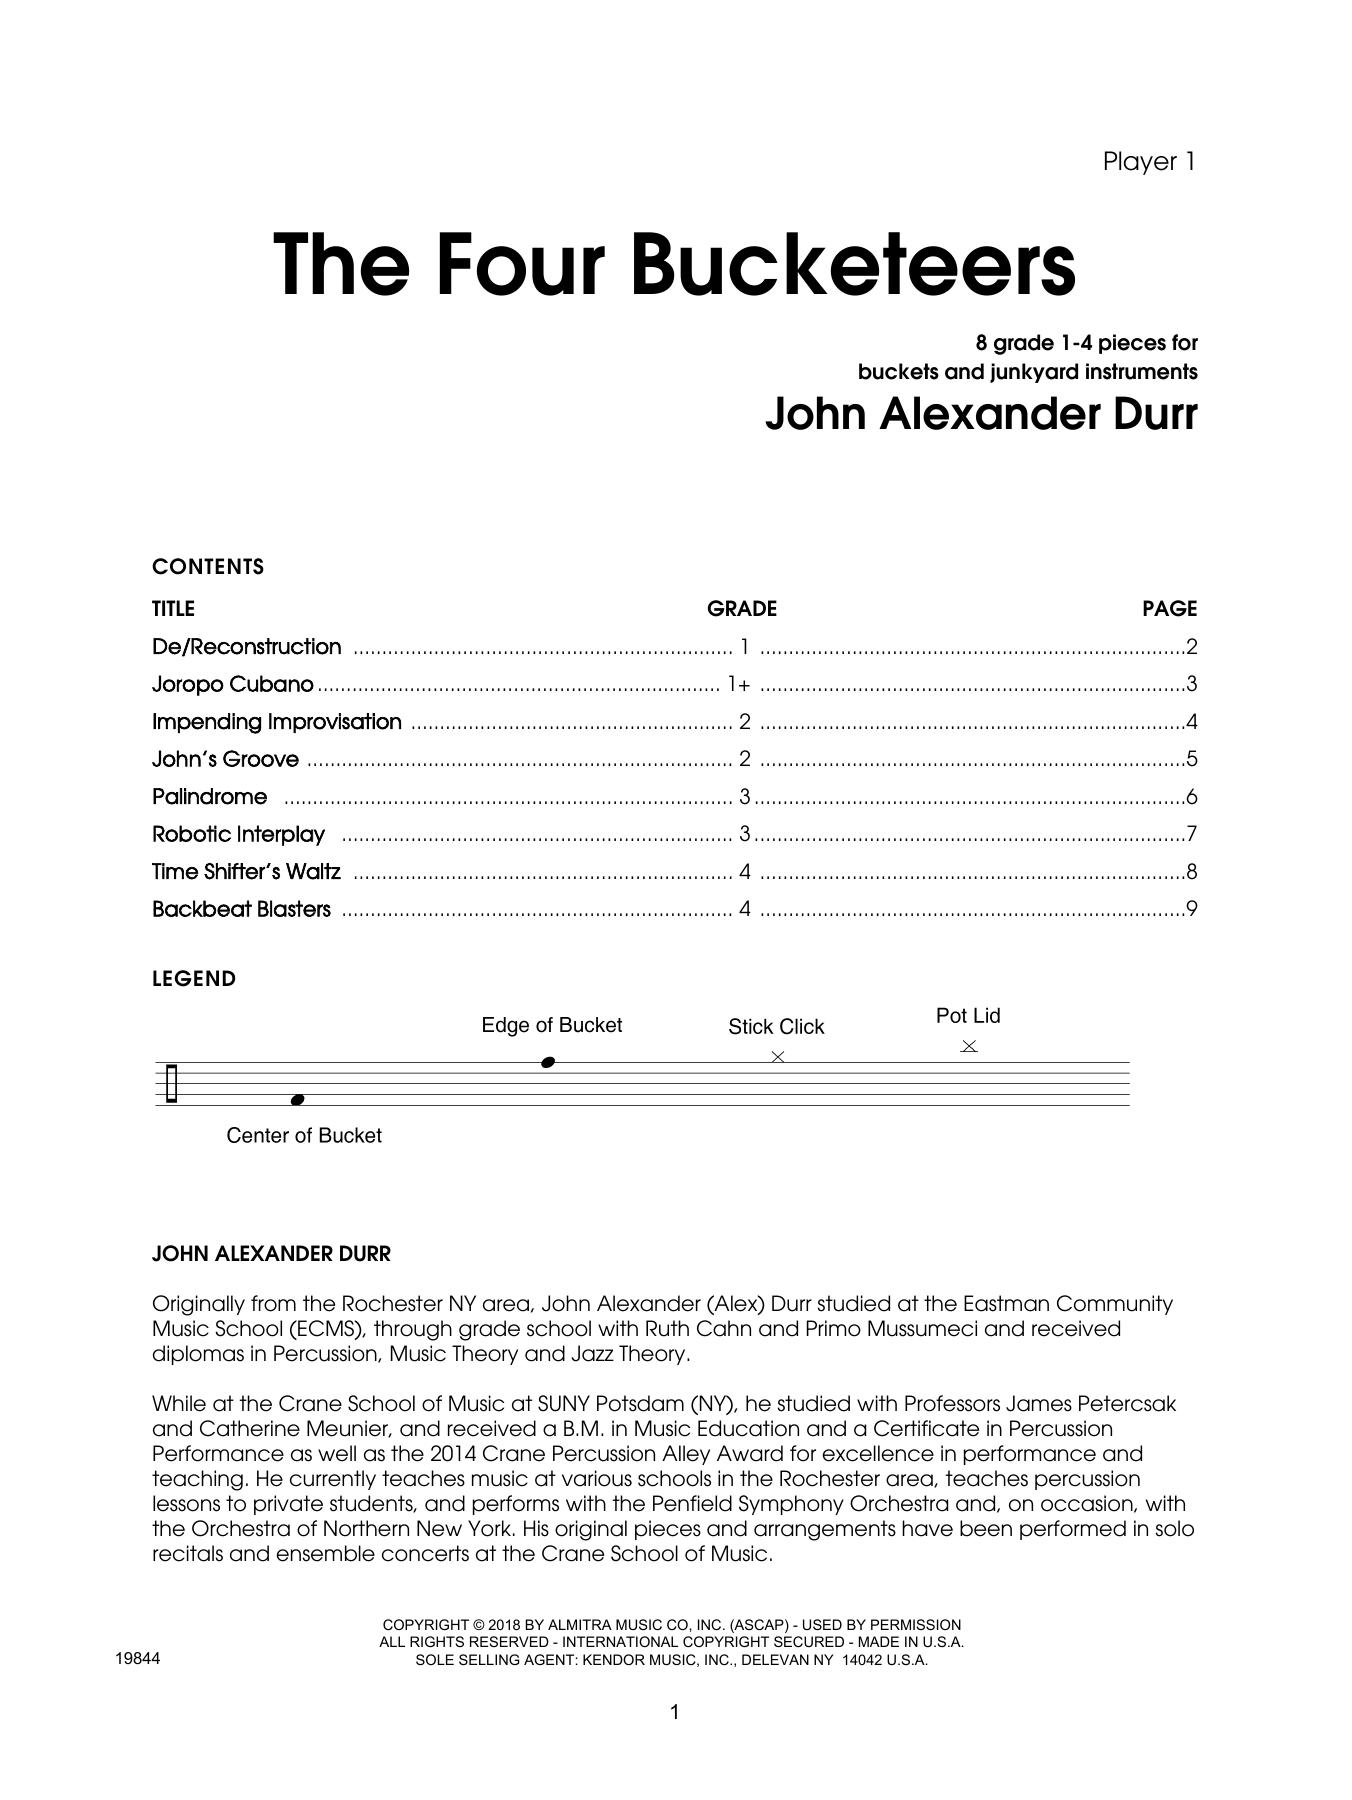 Download John Durr The Four Bucketeers - Percussion 1 Sheet Music